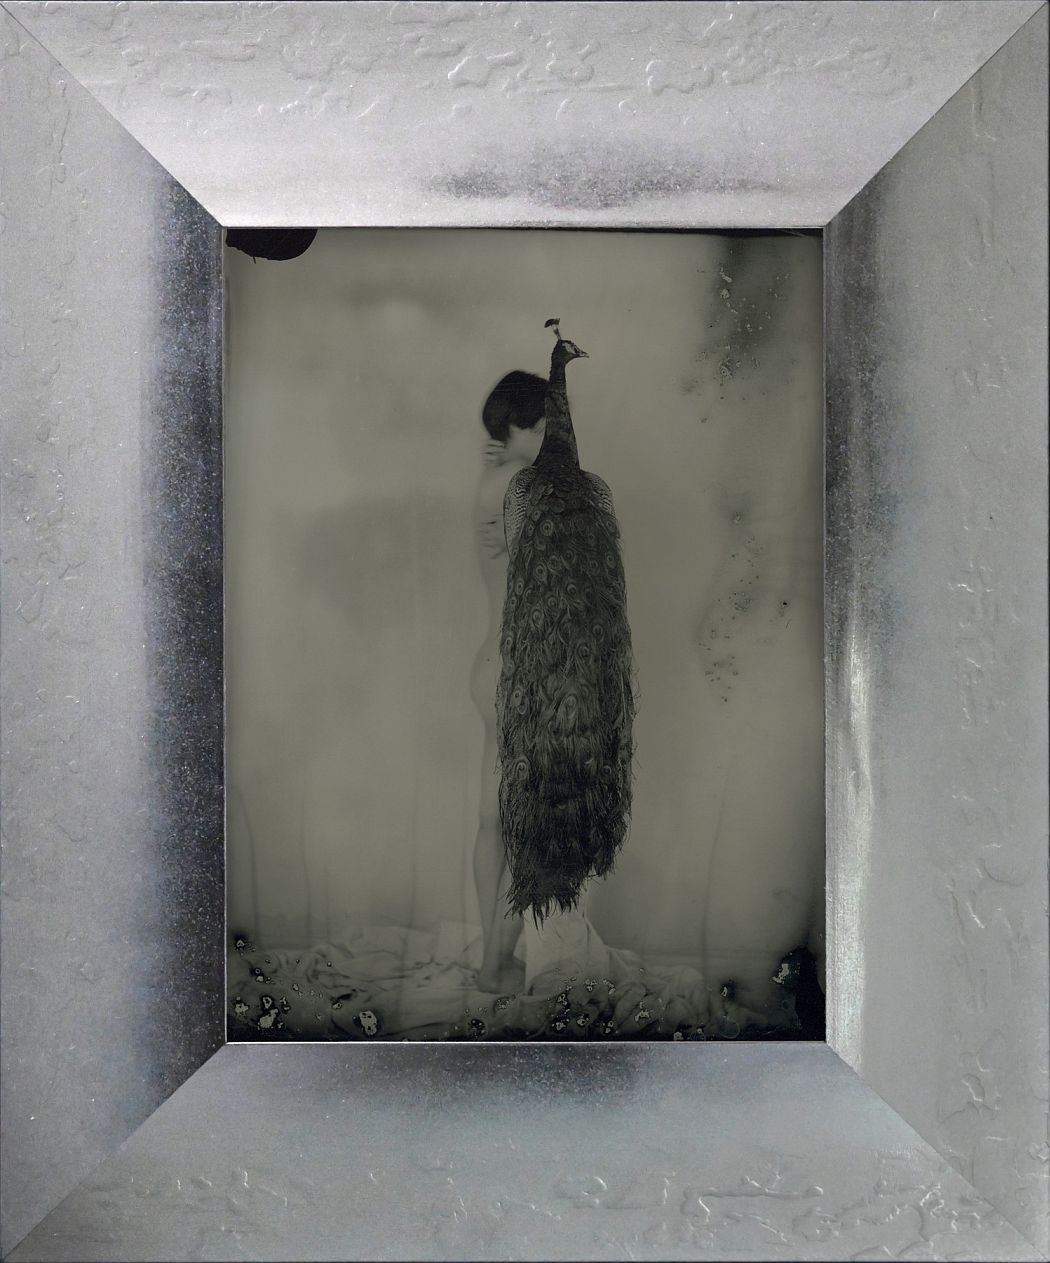 Yamamoto Masao, Untitled (AM #60), 2023. Unique collodion ambrotype, image size: 7 x 5 1/8 inches, frame size: 10 11/16 x 8 7/8 inches.